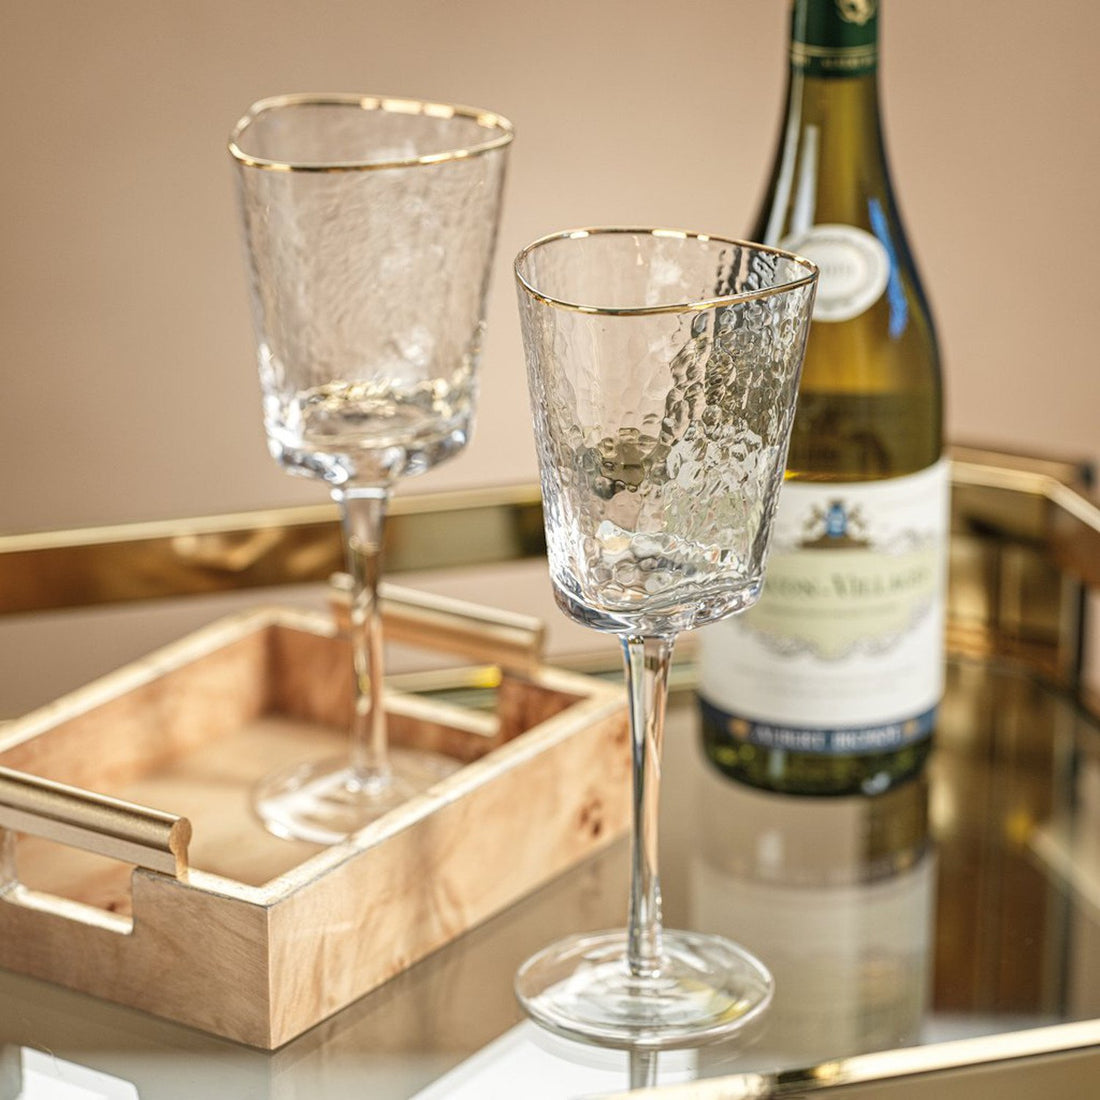 Two Zodax Hammered Glasses with Gold Rim on a tray with a bottle of champagne in the background.